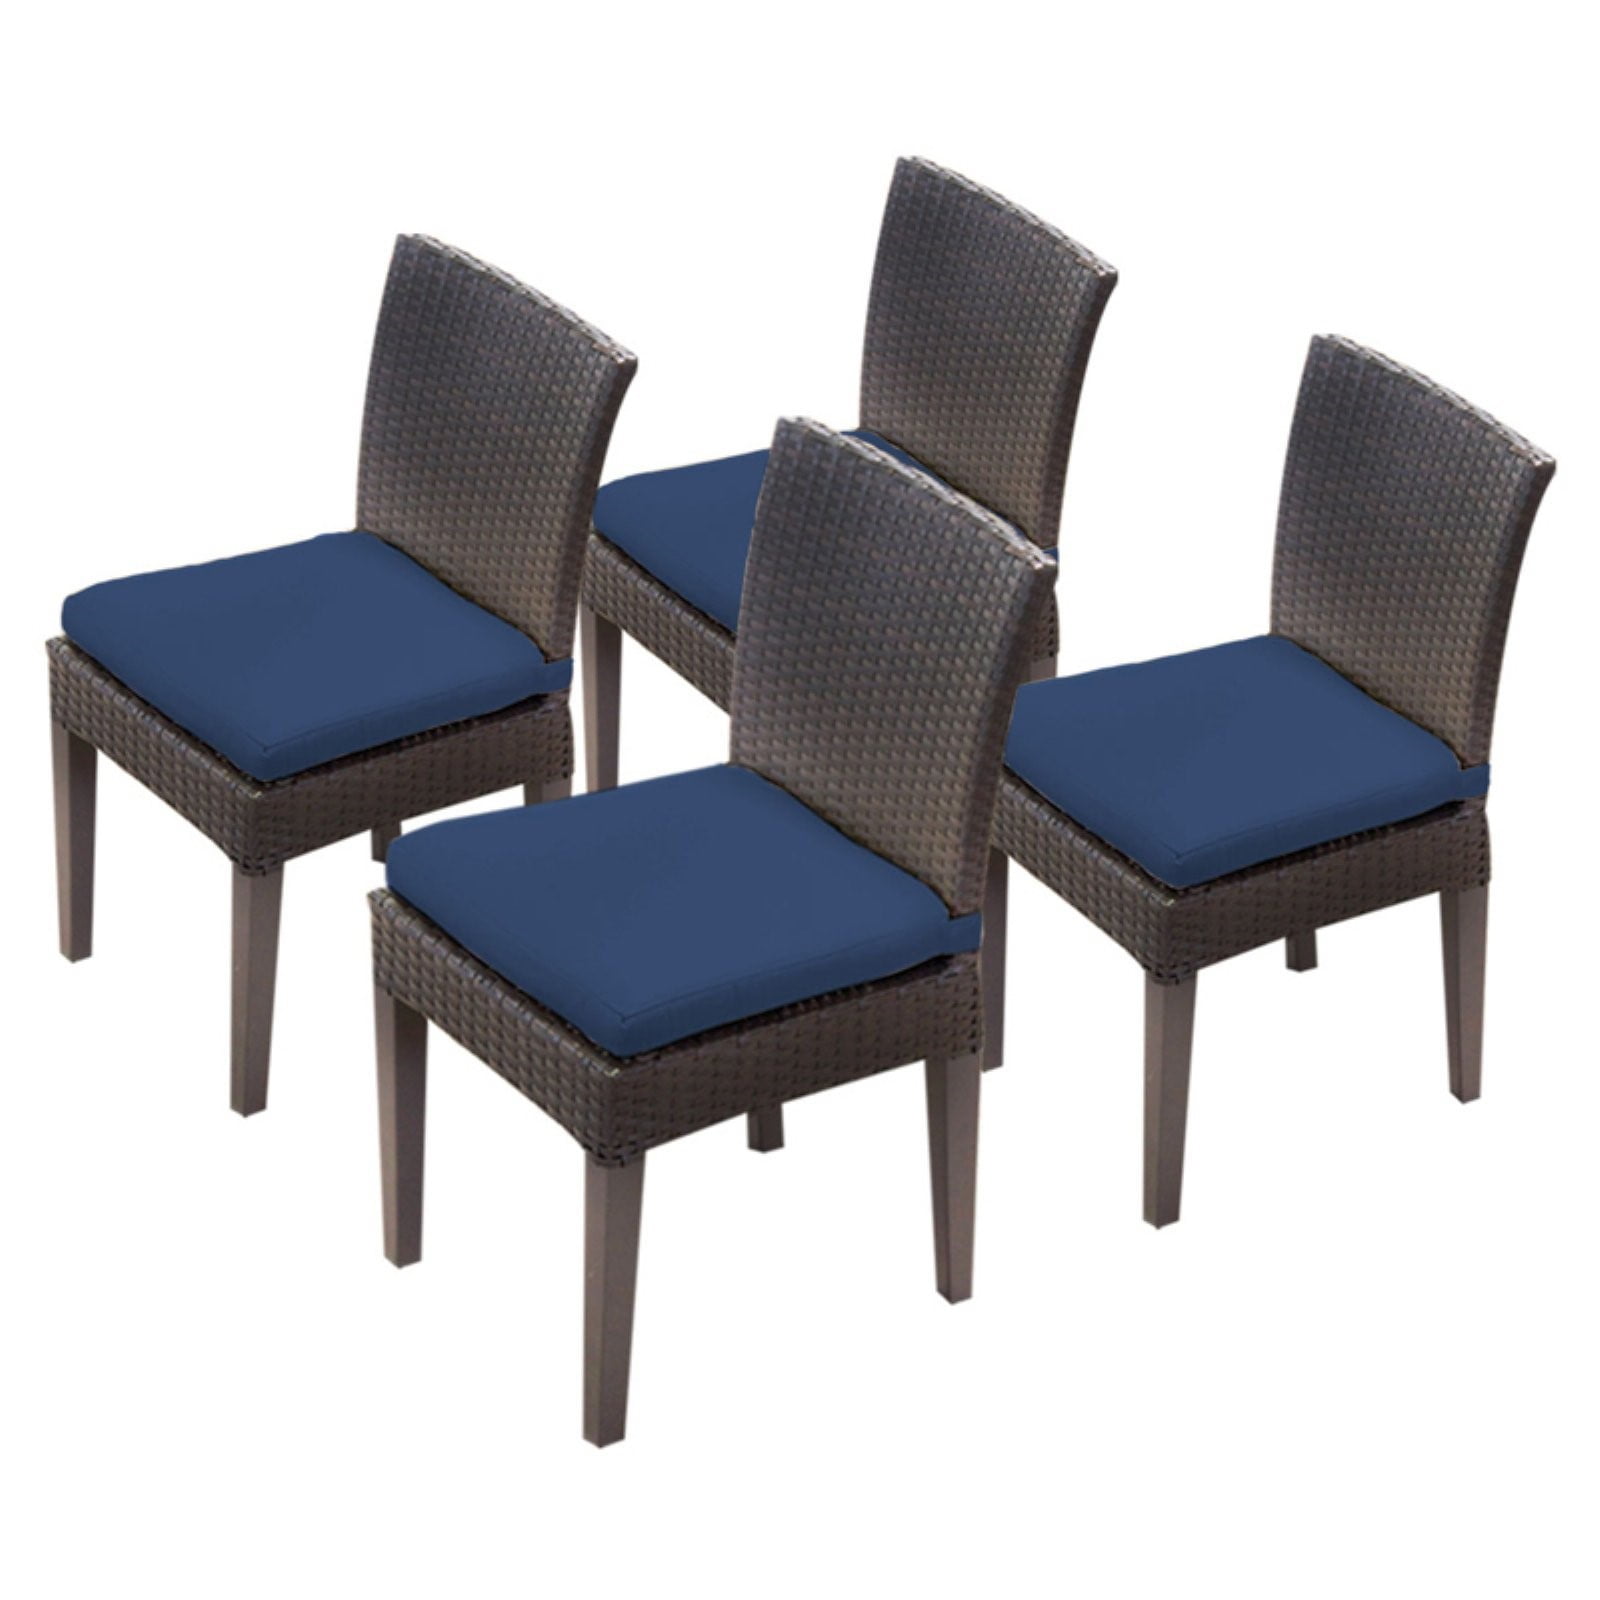 Tk Classics Napa Outdoor Dining Side Chair Set Of 4 With 8